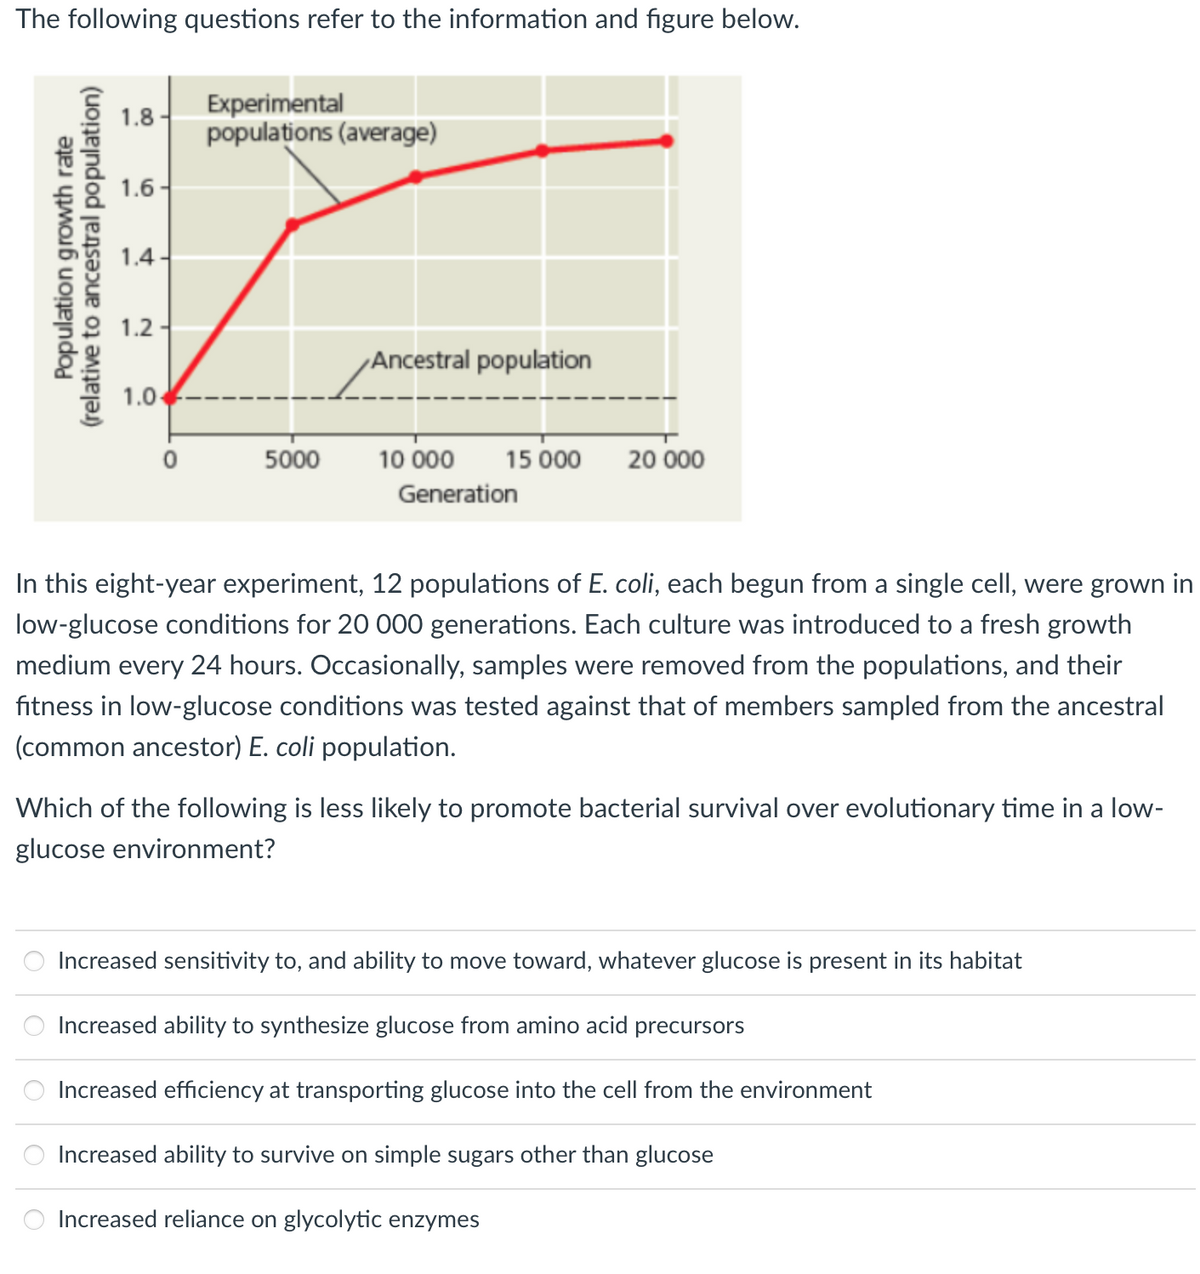 The following questions refer to the information and figure below.
Experimental
populations (average)
1.8 -
1.6
1.4
1.2 -
Ancestral population
1.0
5000
10 000
15 000
20 000
Generation
In this eight-year experiment, 12 populations of E. coli, each begun from a single cell, were grown in
low-glucose conditions for 20 000 generations. Each culture was introduced to a fresh growth
medium every 24 hours. Occasionally, samples were removed from the populations, and their
fitness in low-glucose conditions was tested against that of members sampled from the ancestral
(common ancestor) E. coli population.
Which of the following is less likely to promote bacterial survival over evolutionary time in a low-
glucose environment?
Increased sensitivity to, and ability to move toward, whatever glucose is present in its habitat
Increased ability to synthesize glucose from amino acid precursors
Increased efficiency at transporting glucose into the cell from the environment
Increased ability to survive on simple sugars other than glucose
Increased reliance on glycolytic enzymes
Population growth rate
(relative to ancestral population)
